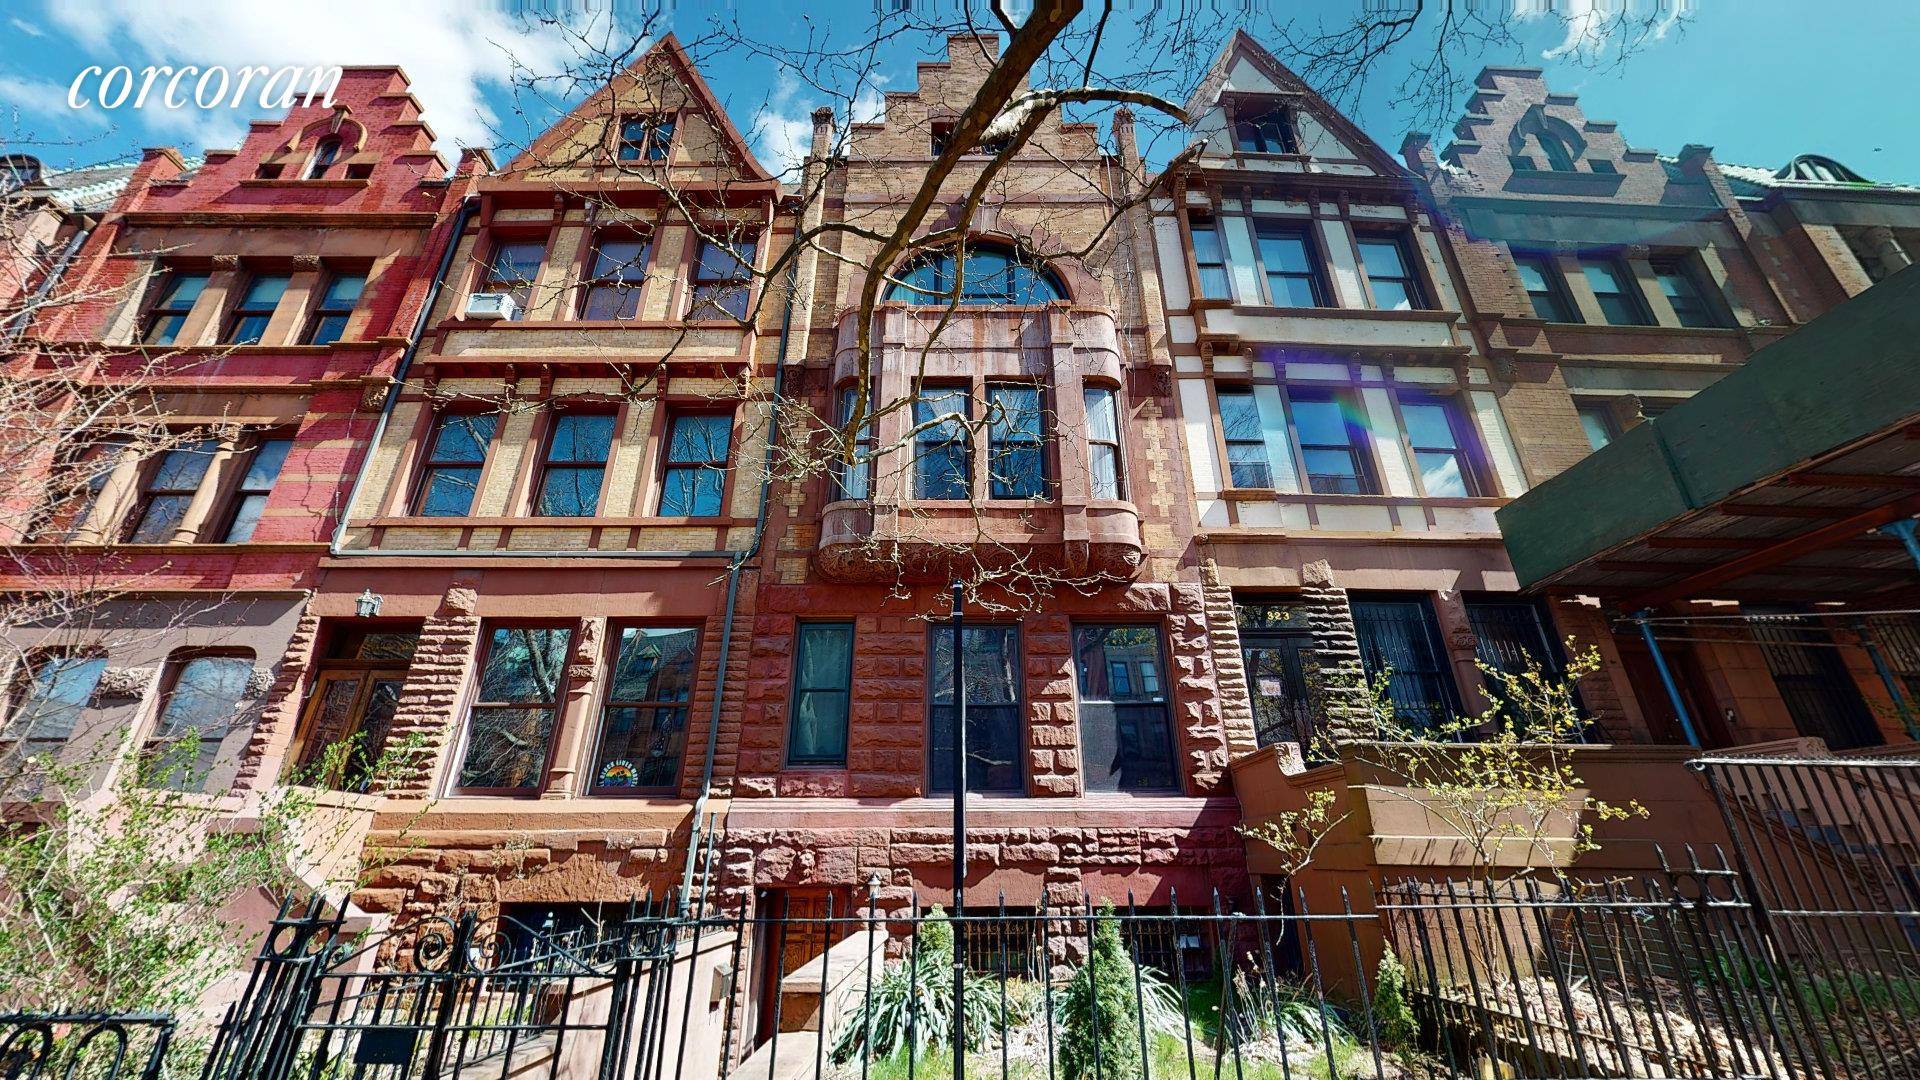 This charming 20 foot wide five story brownstone situated in Hamilton Heights, designed by architect Adolph Hoak in 1890, is truly a one of a kind single family home.